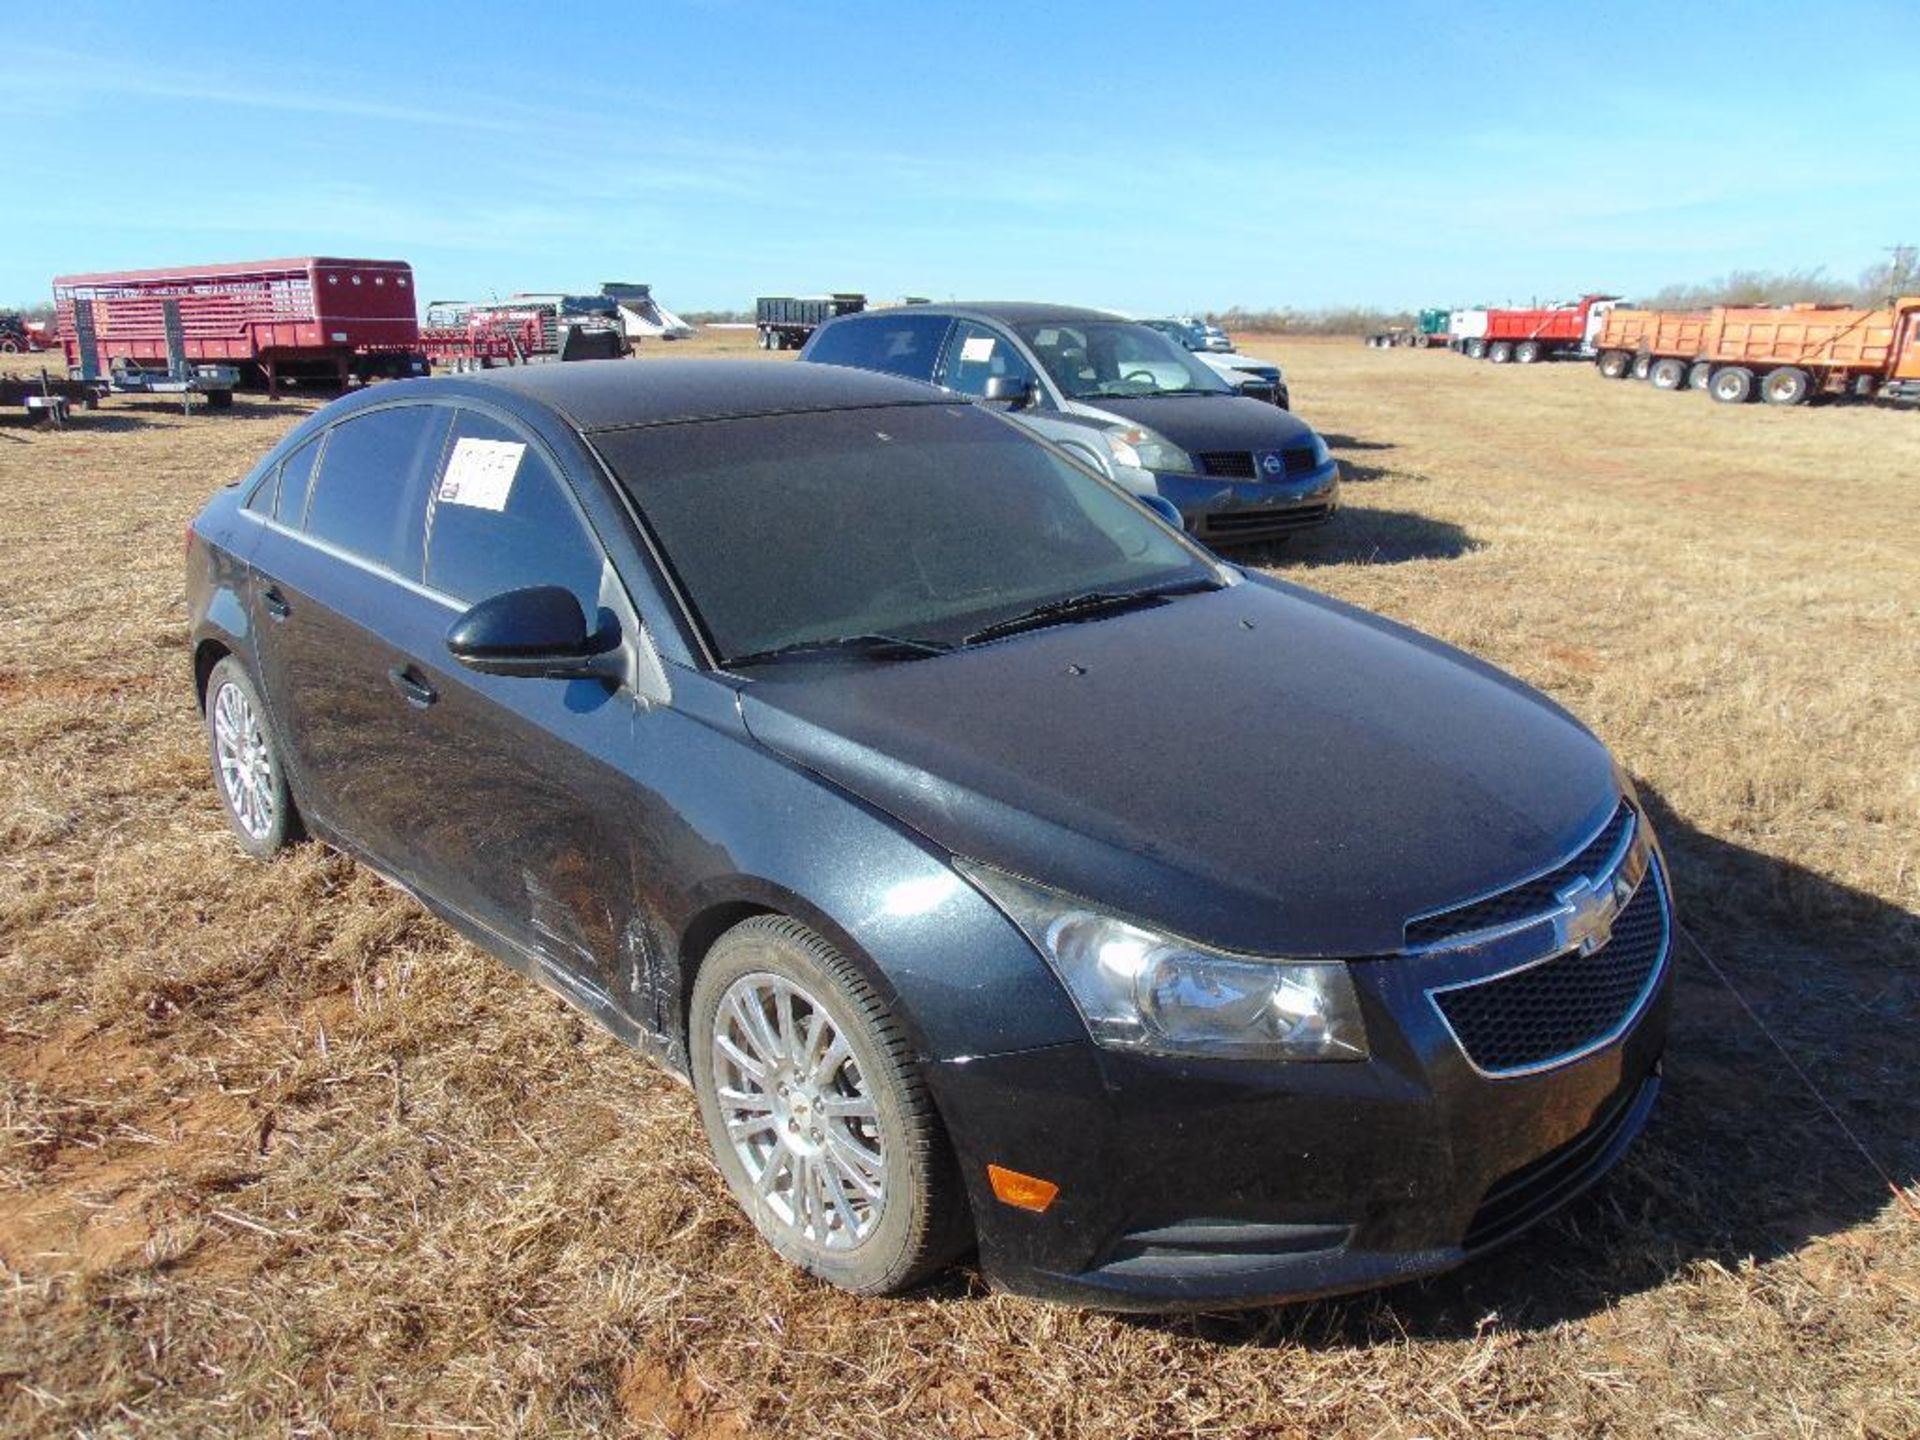 2011 Chevy Cruze s/n 1g1pj5s96b7290011, 4 cylinder, auto trans, od reads 97895 miles, - Image 2 of 10